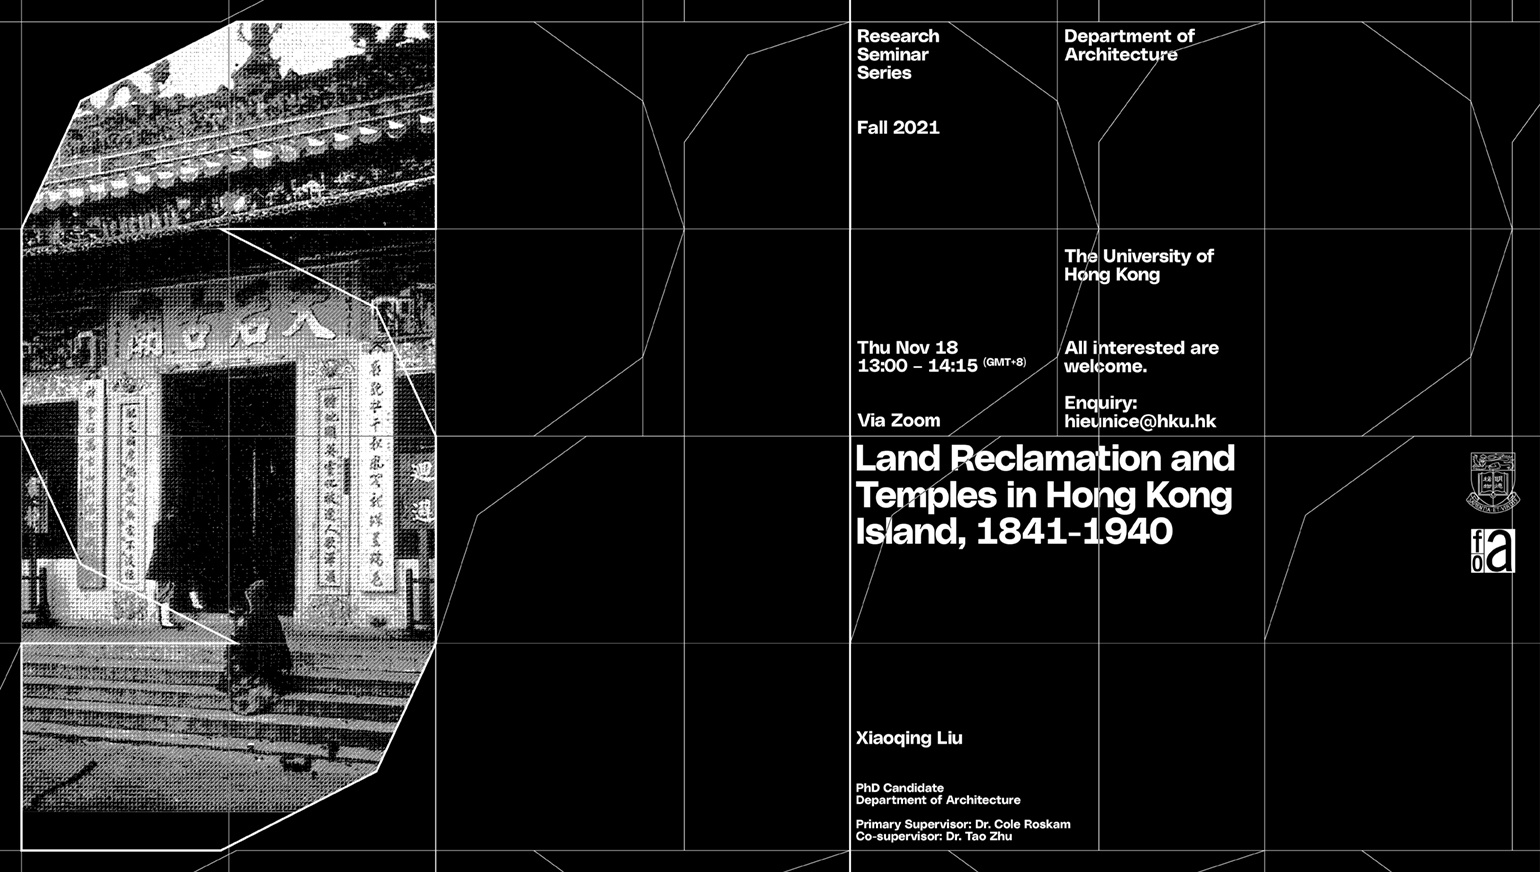 Land Reclamation and Chinese Temples in Hong Kong Island, 1841-1900